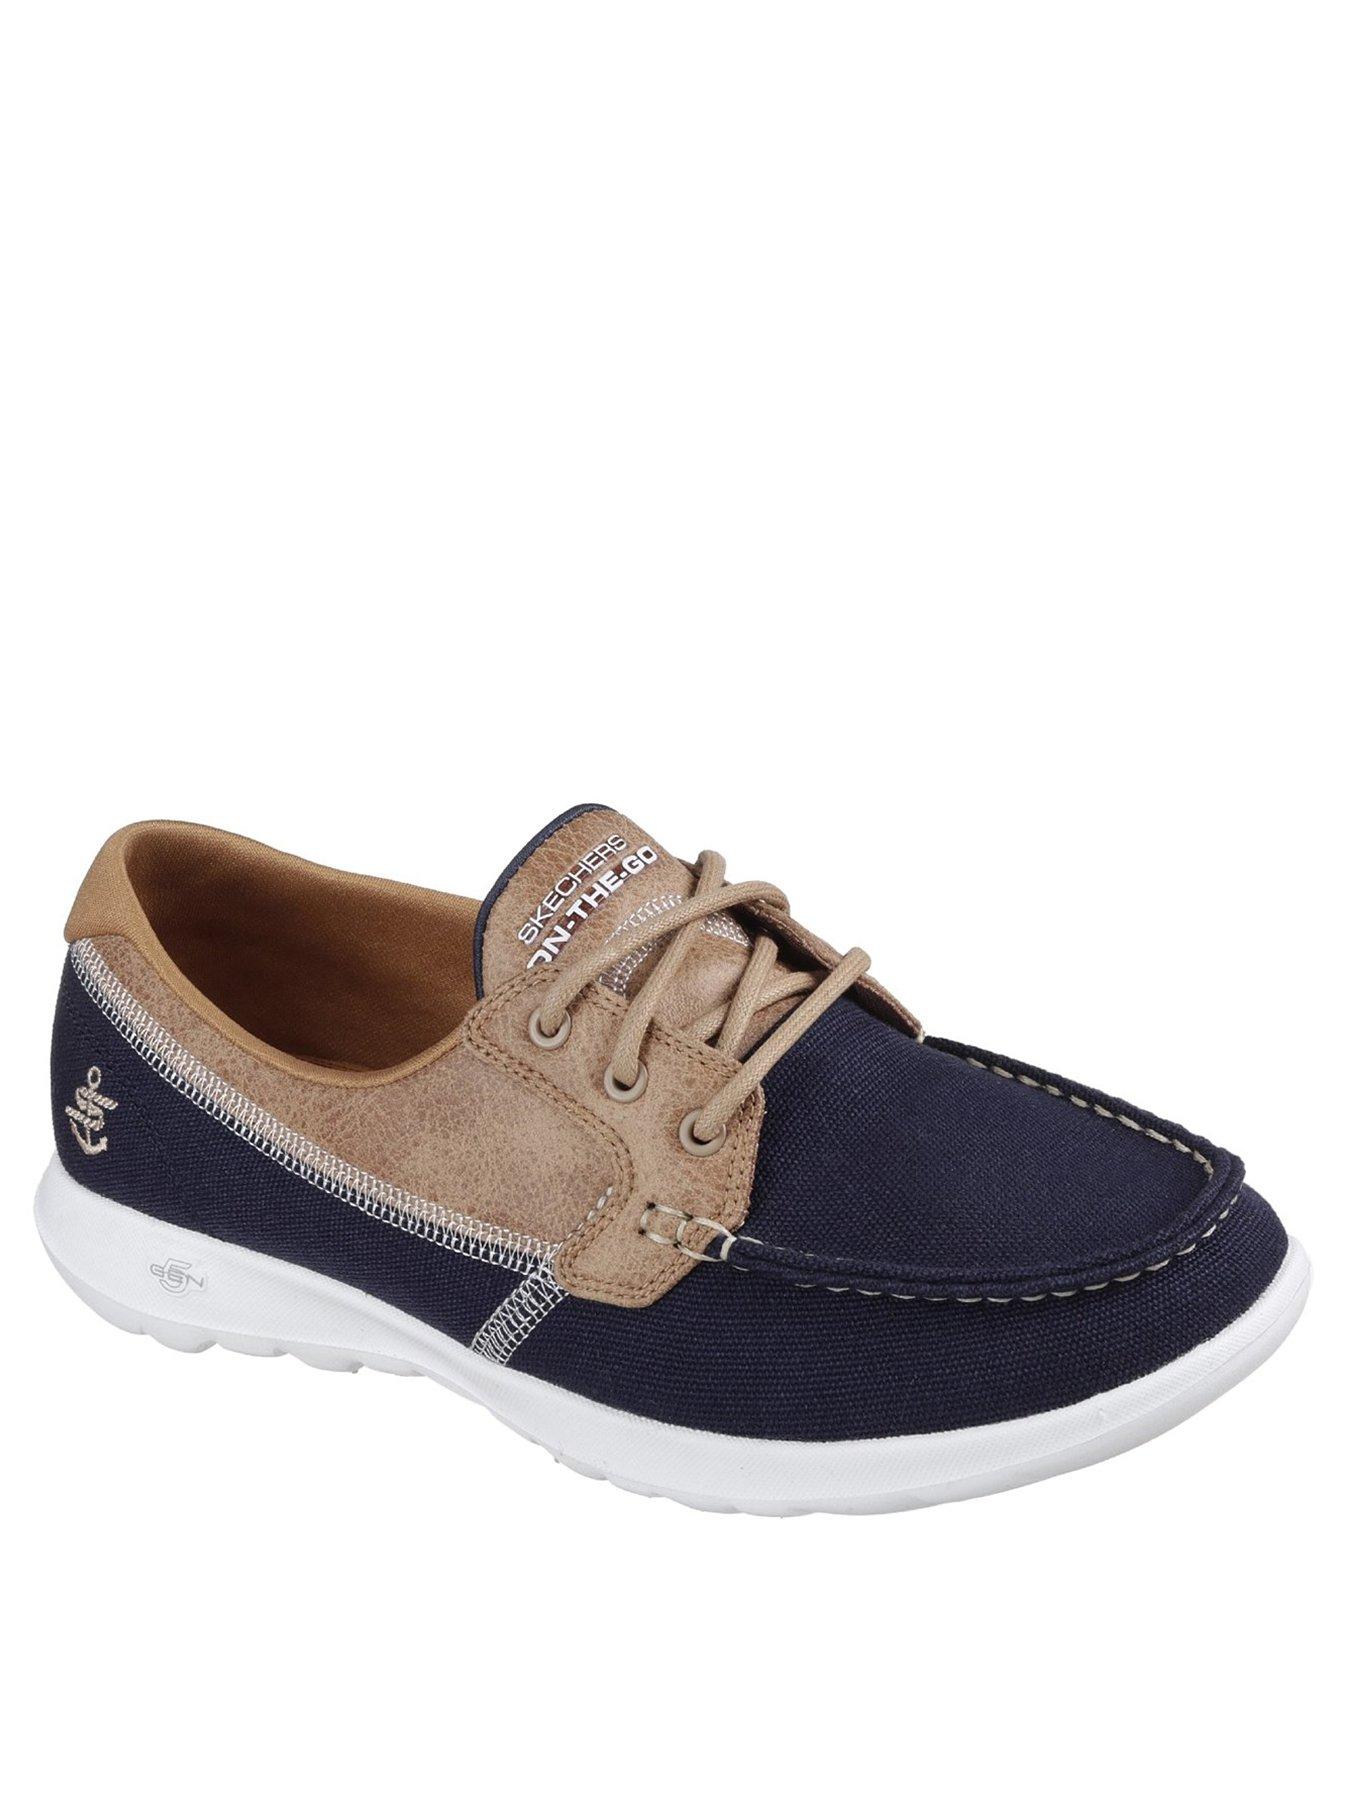 skechers on the go voyage womens boat shoe